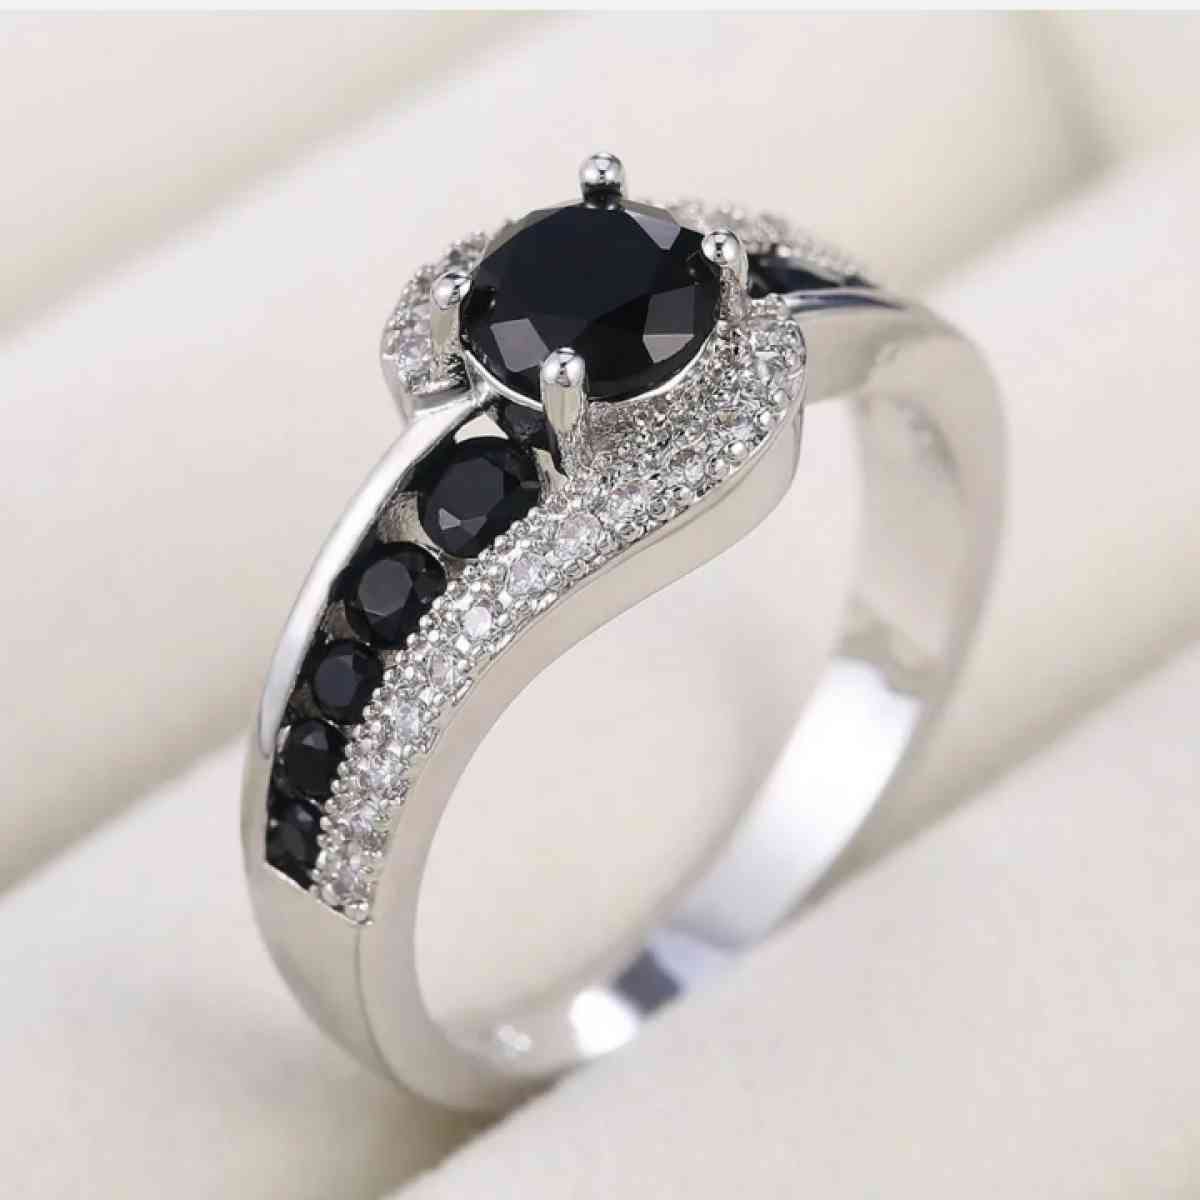 New Black Sapphire Sterling Silver Ring , Size 8